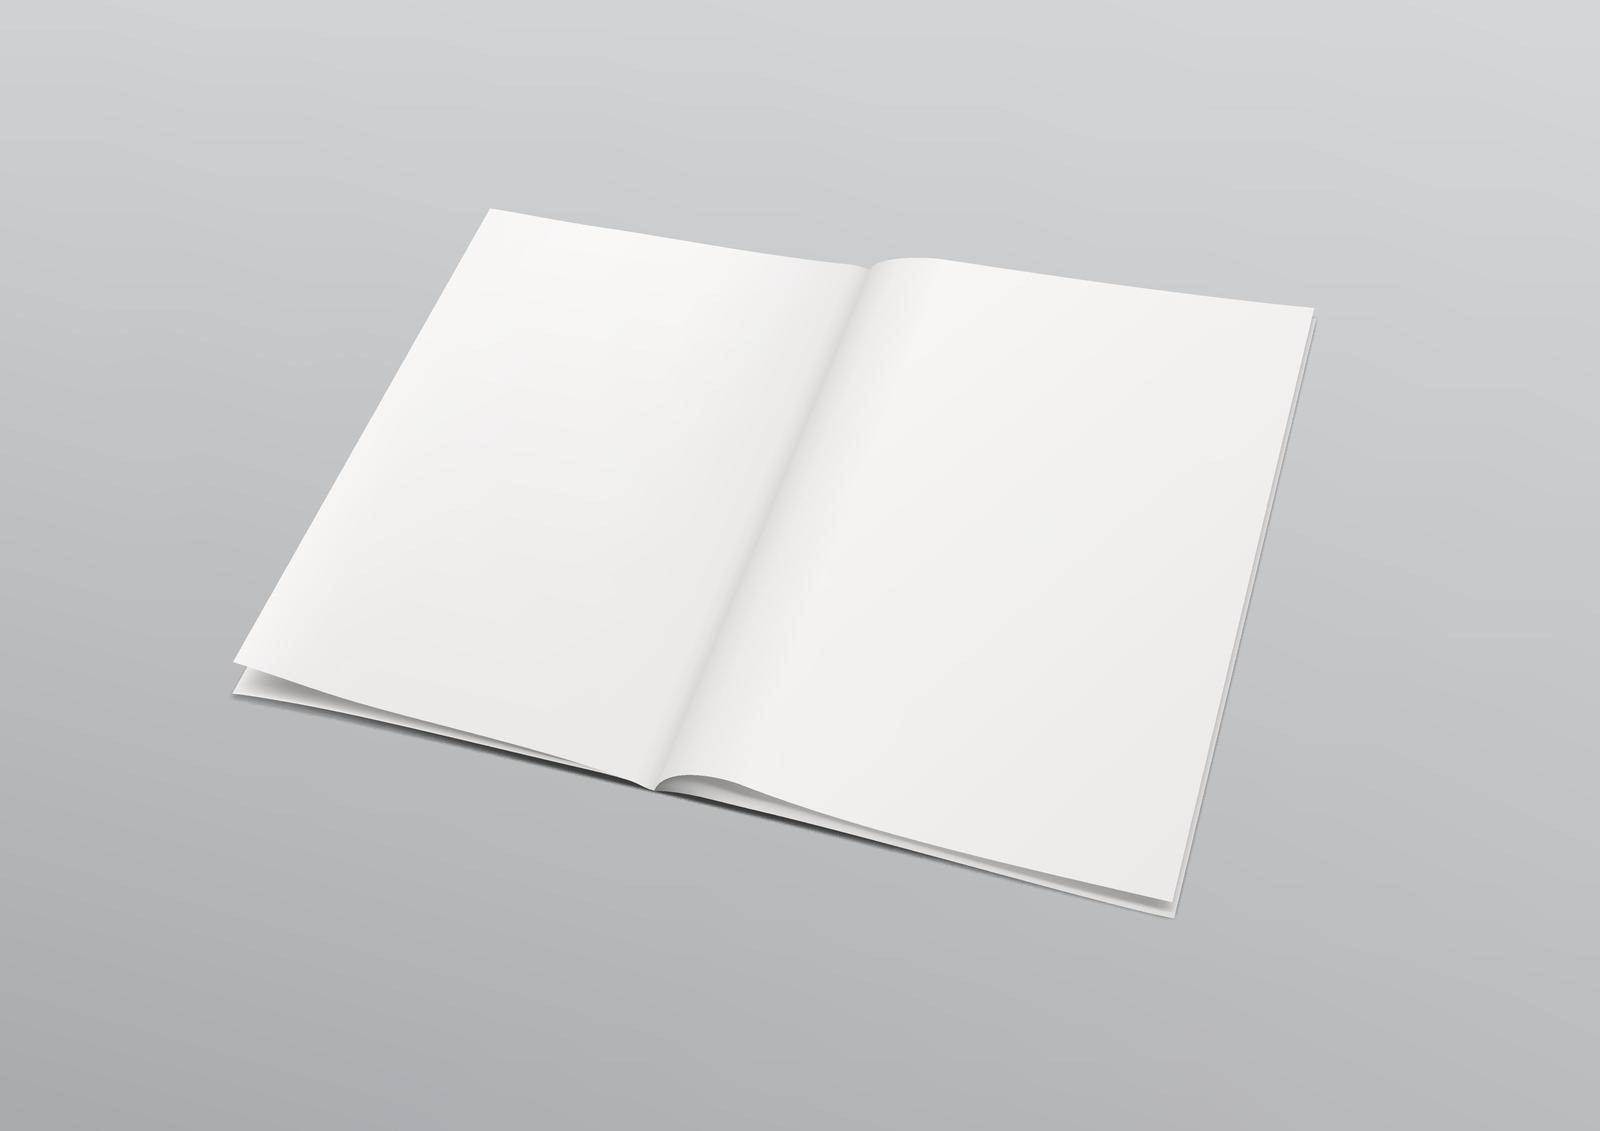 Clear Empty Opened Book With Copy Space Template. EPS10 Vector